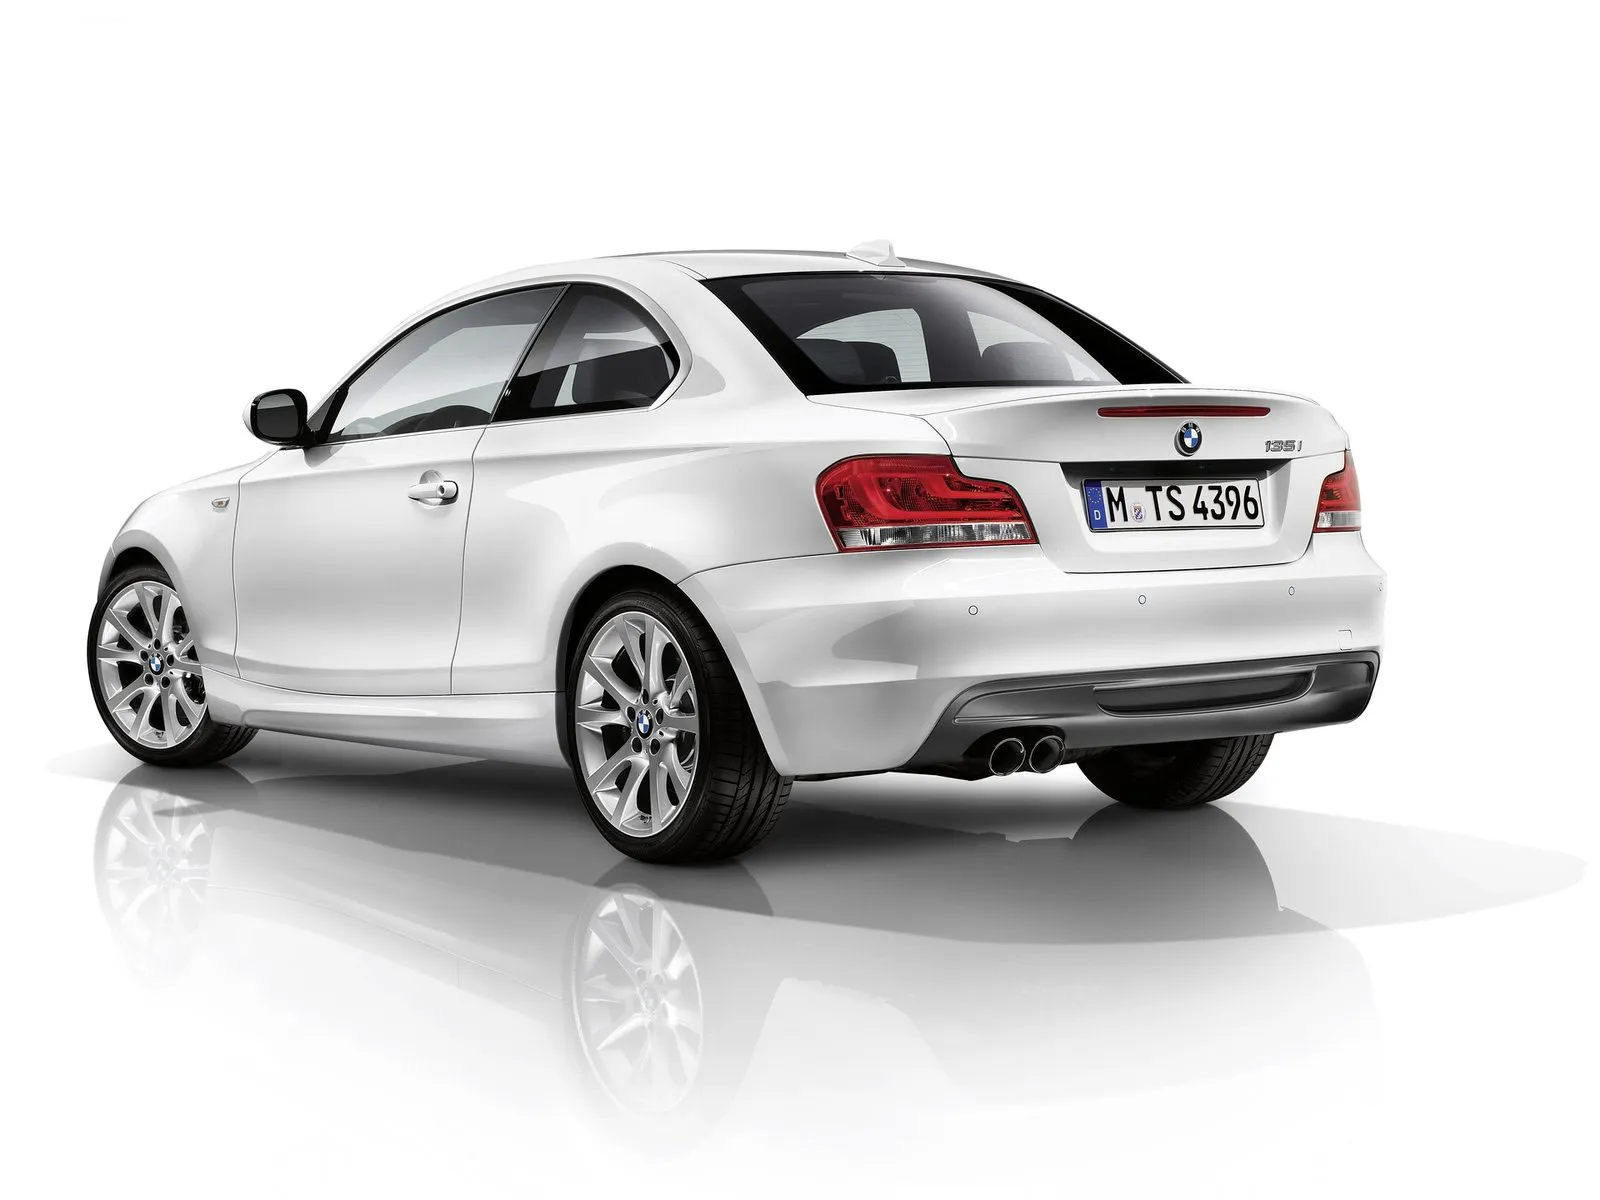 BMW 1 series 135is 2012 photo - 11